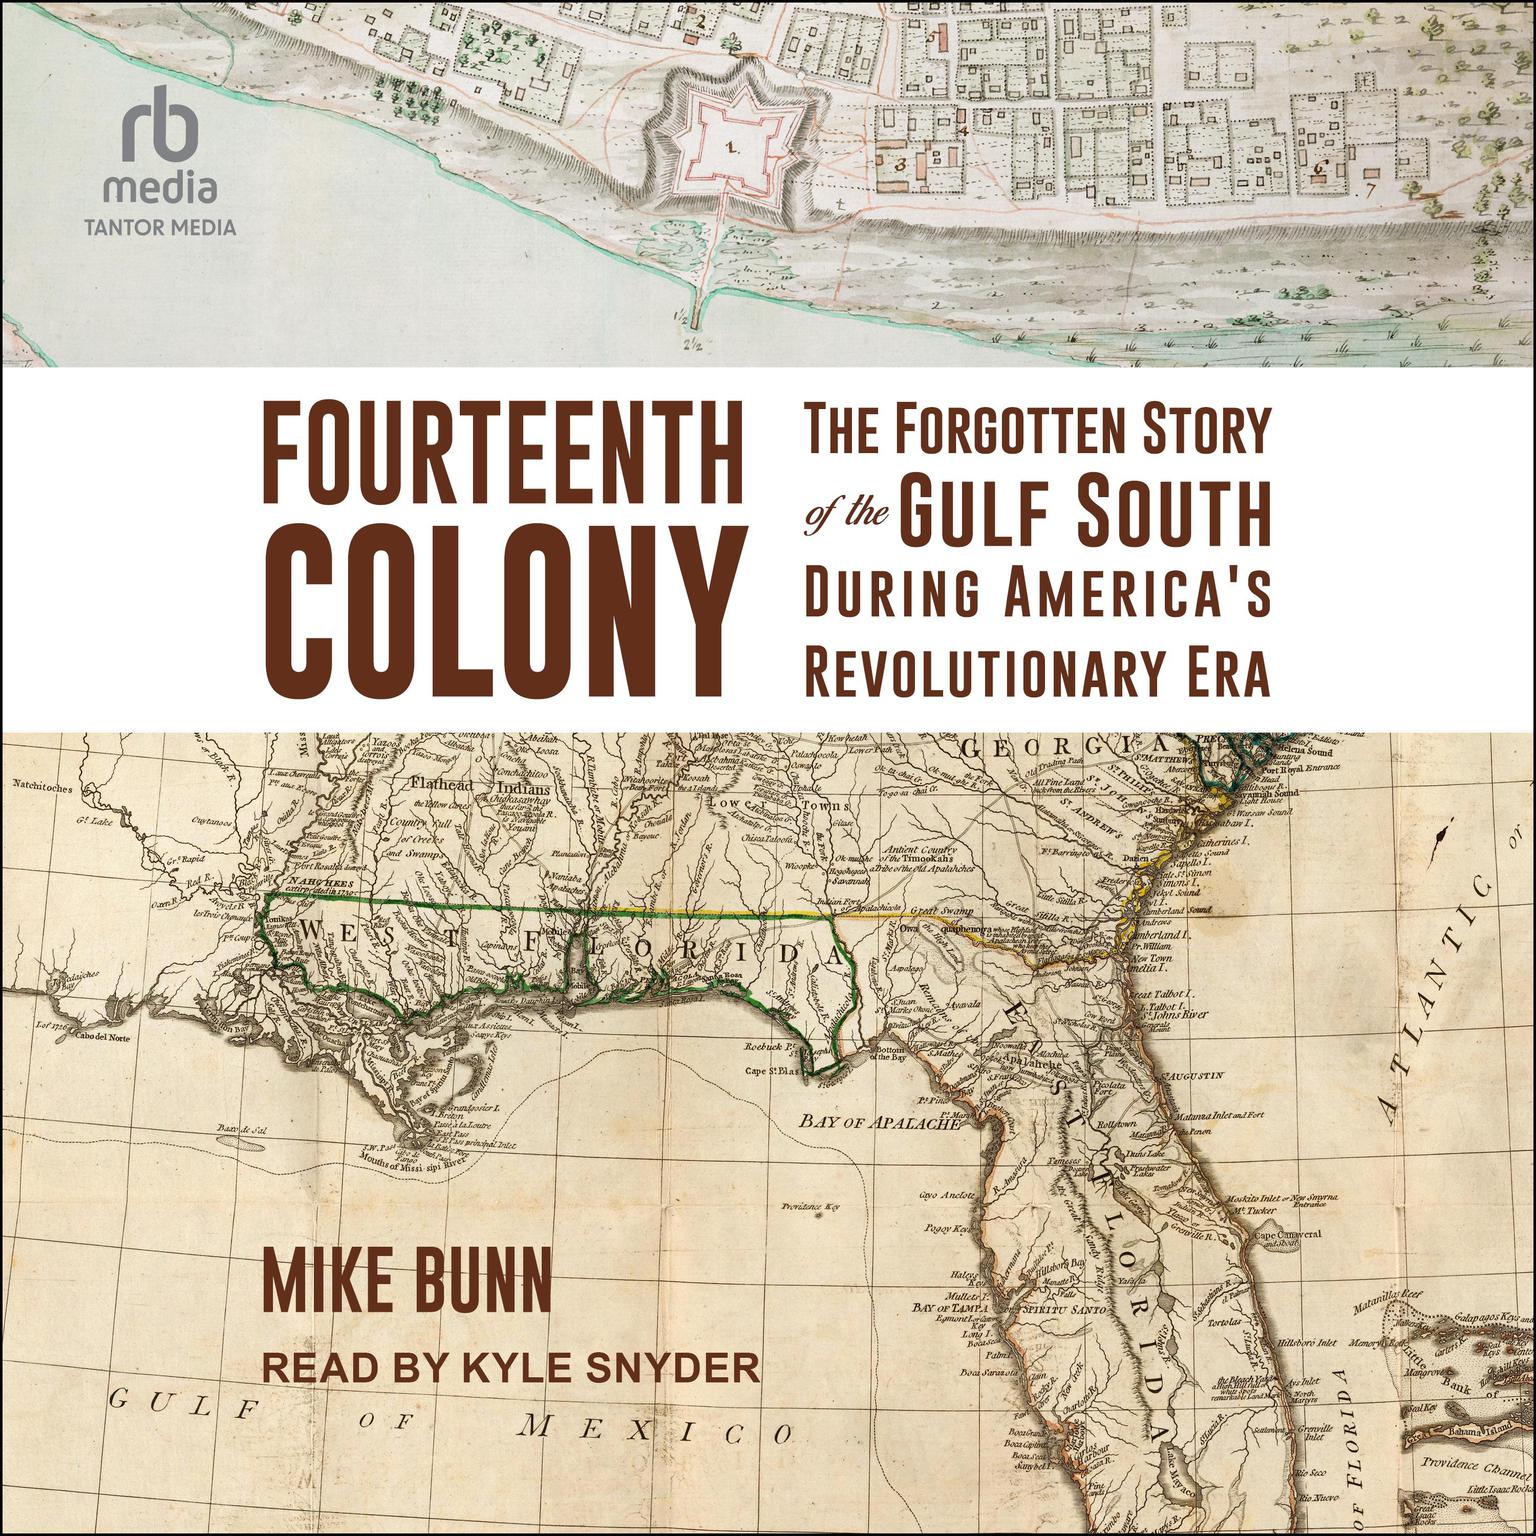 Fourteenth Colony: The Forgotten Story of the Gulf South During Americas Revolutionary Era Audiobook, by Mike Bunn